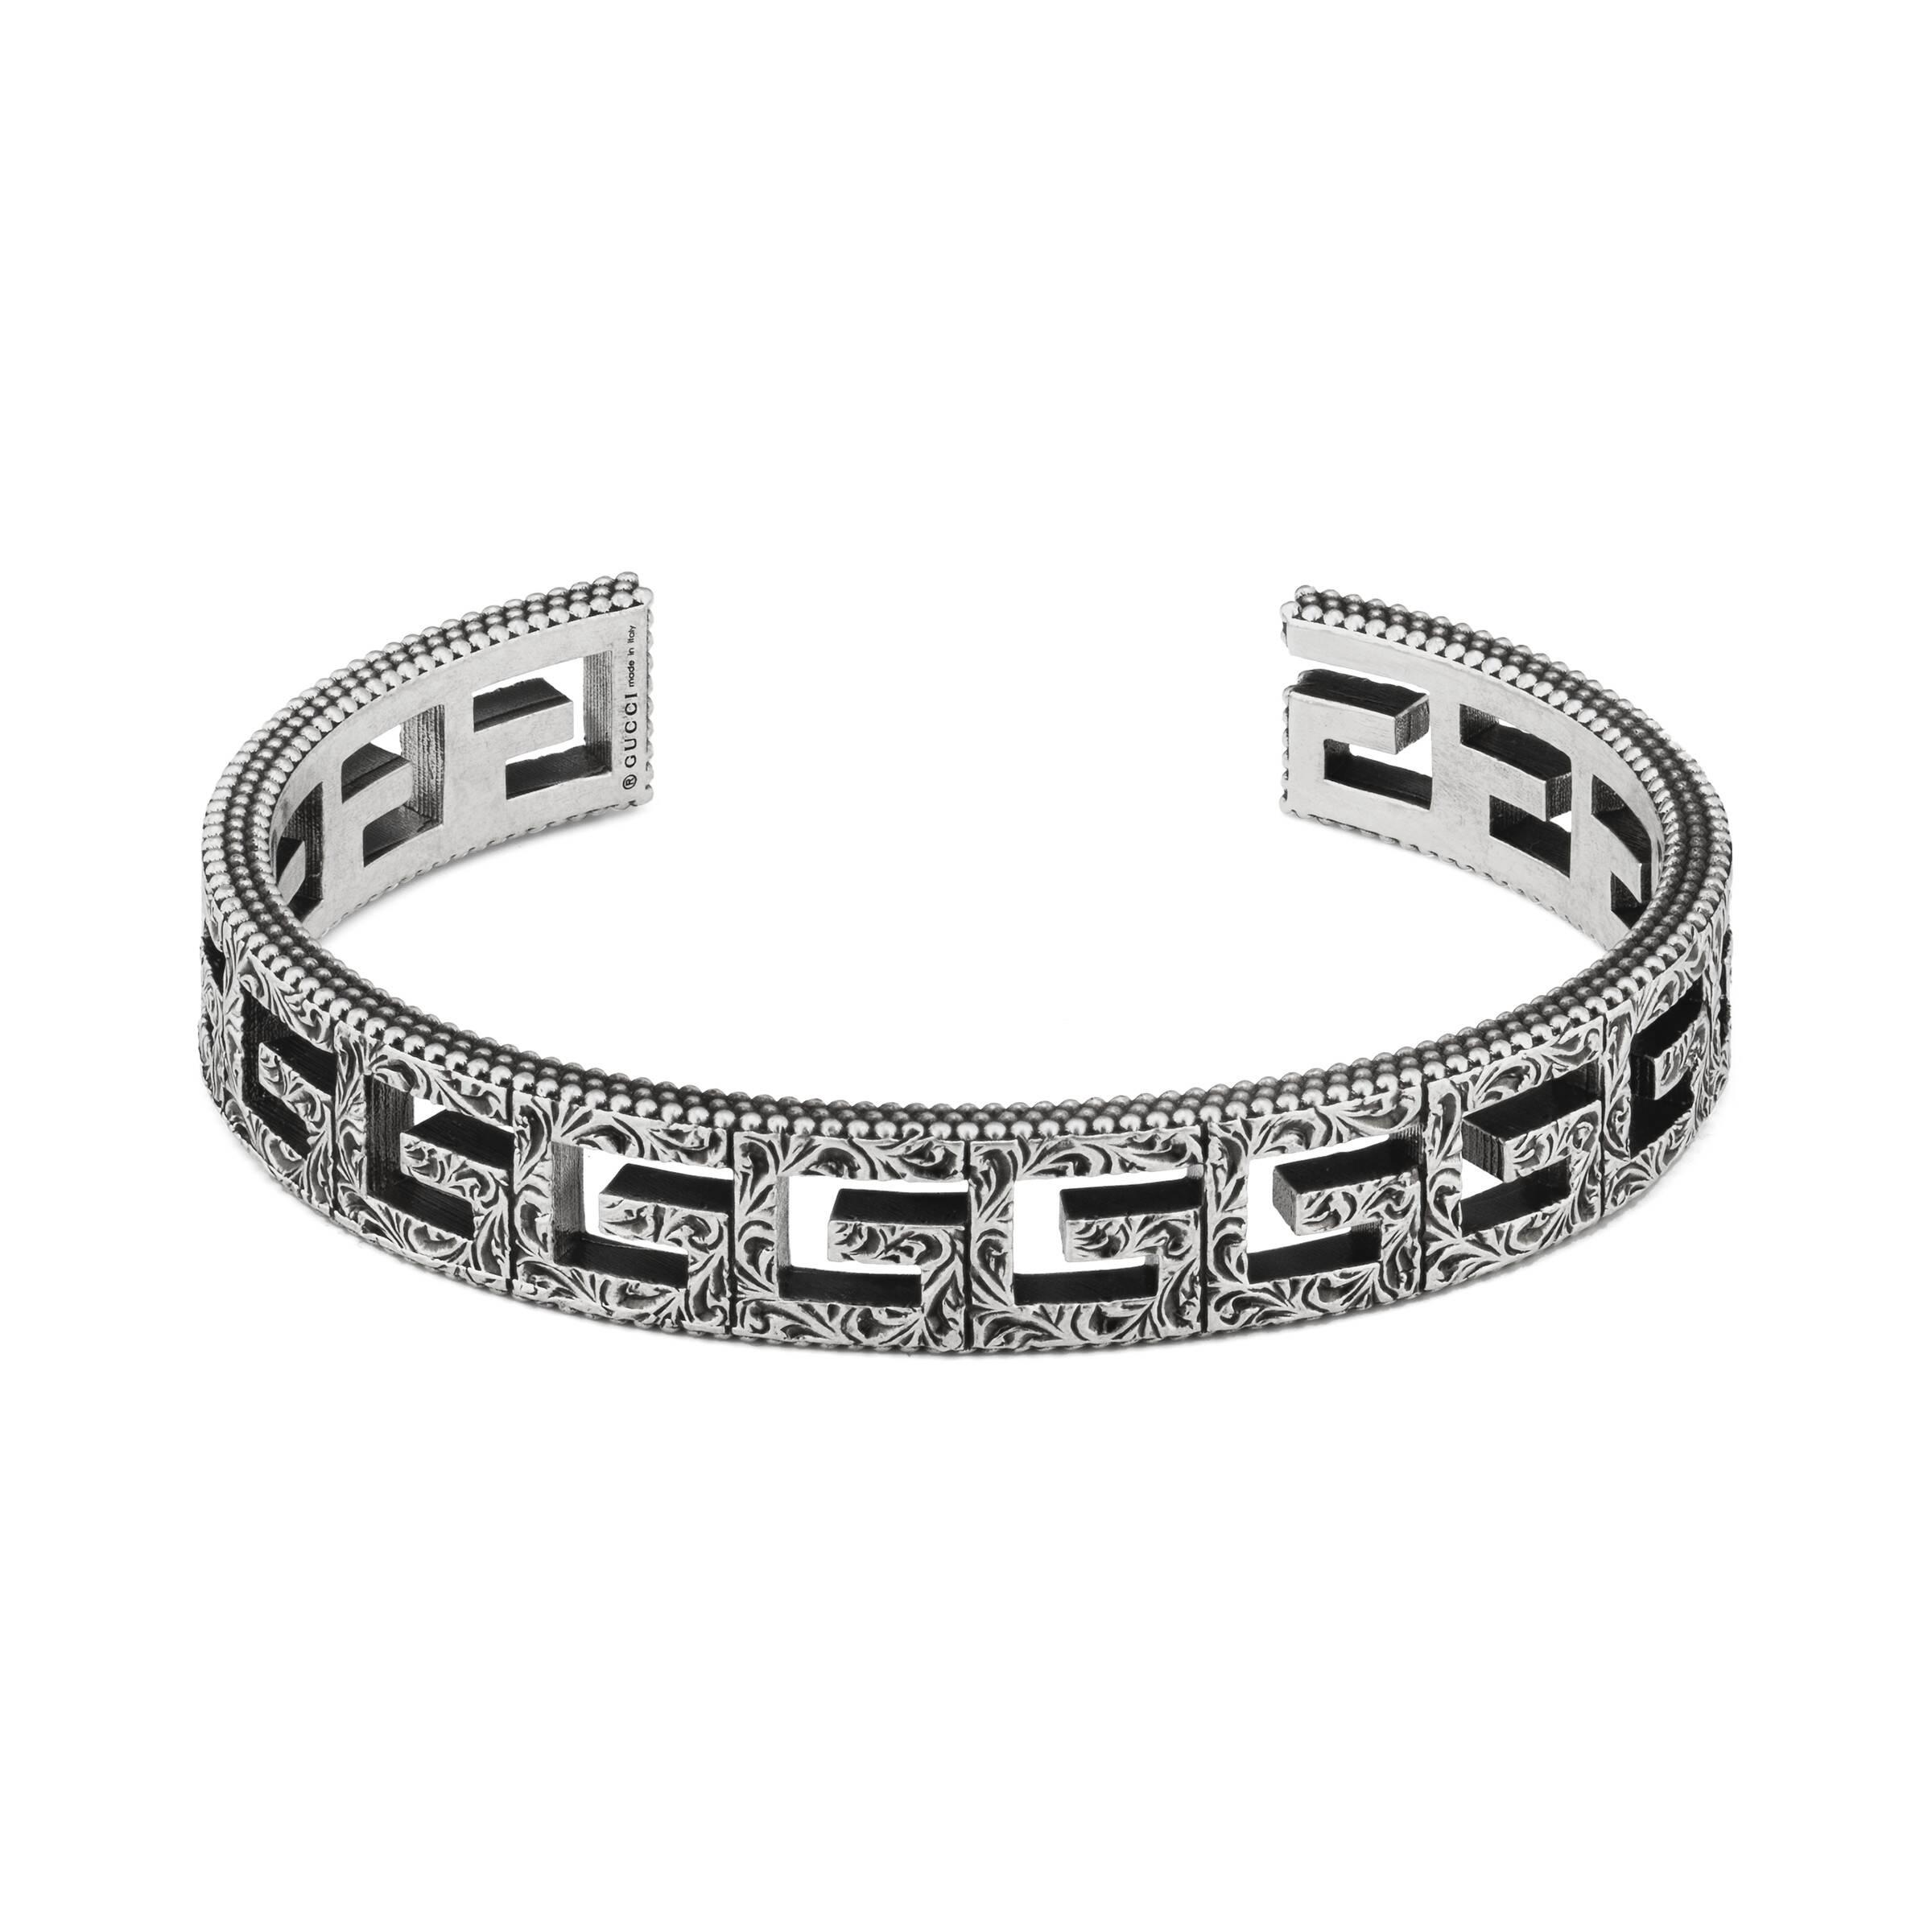 Gucci Cuff Bracelet With Square G Motif in Metallic for Men - Lyst